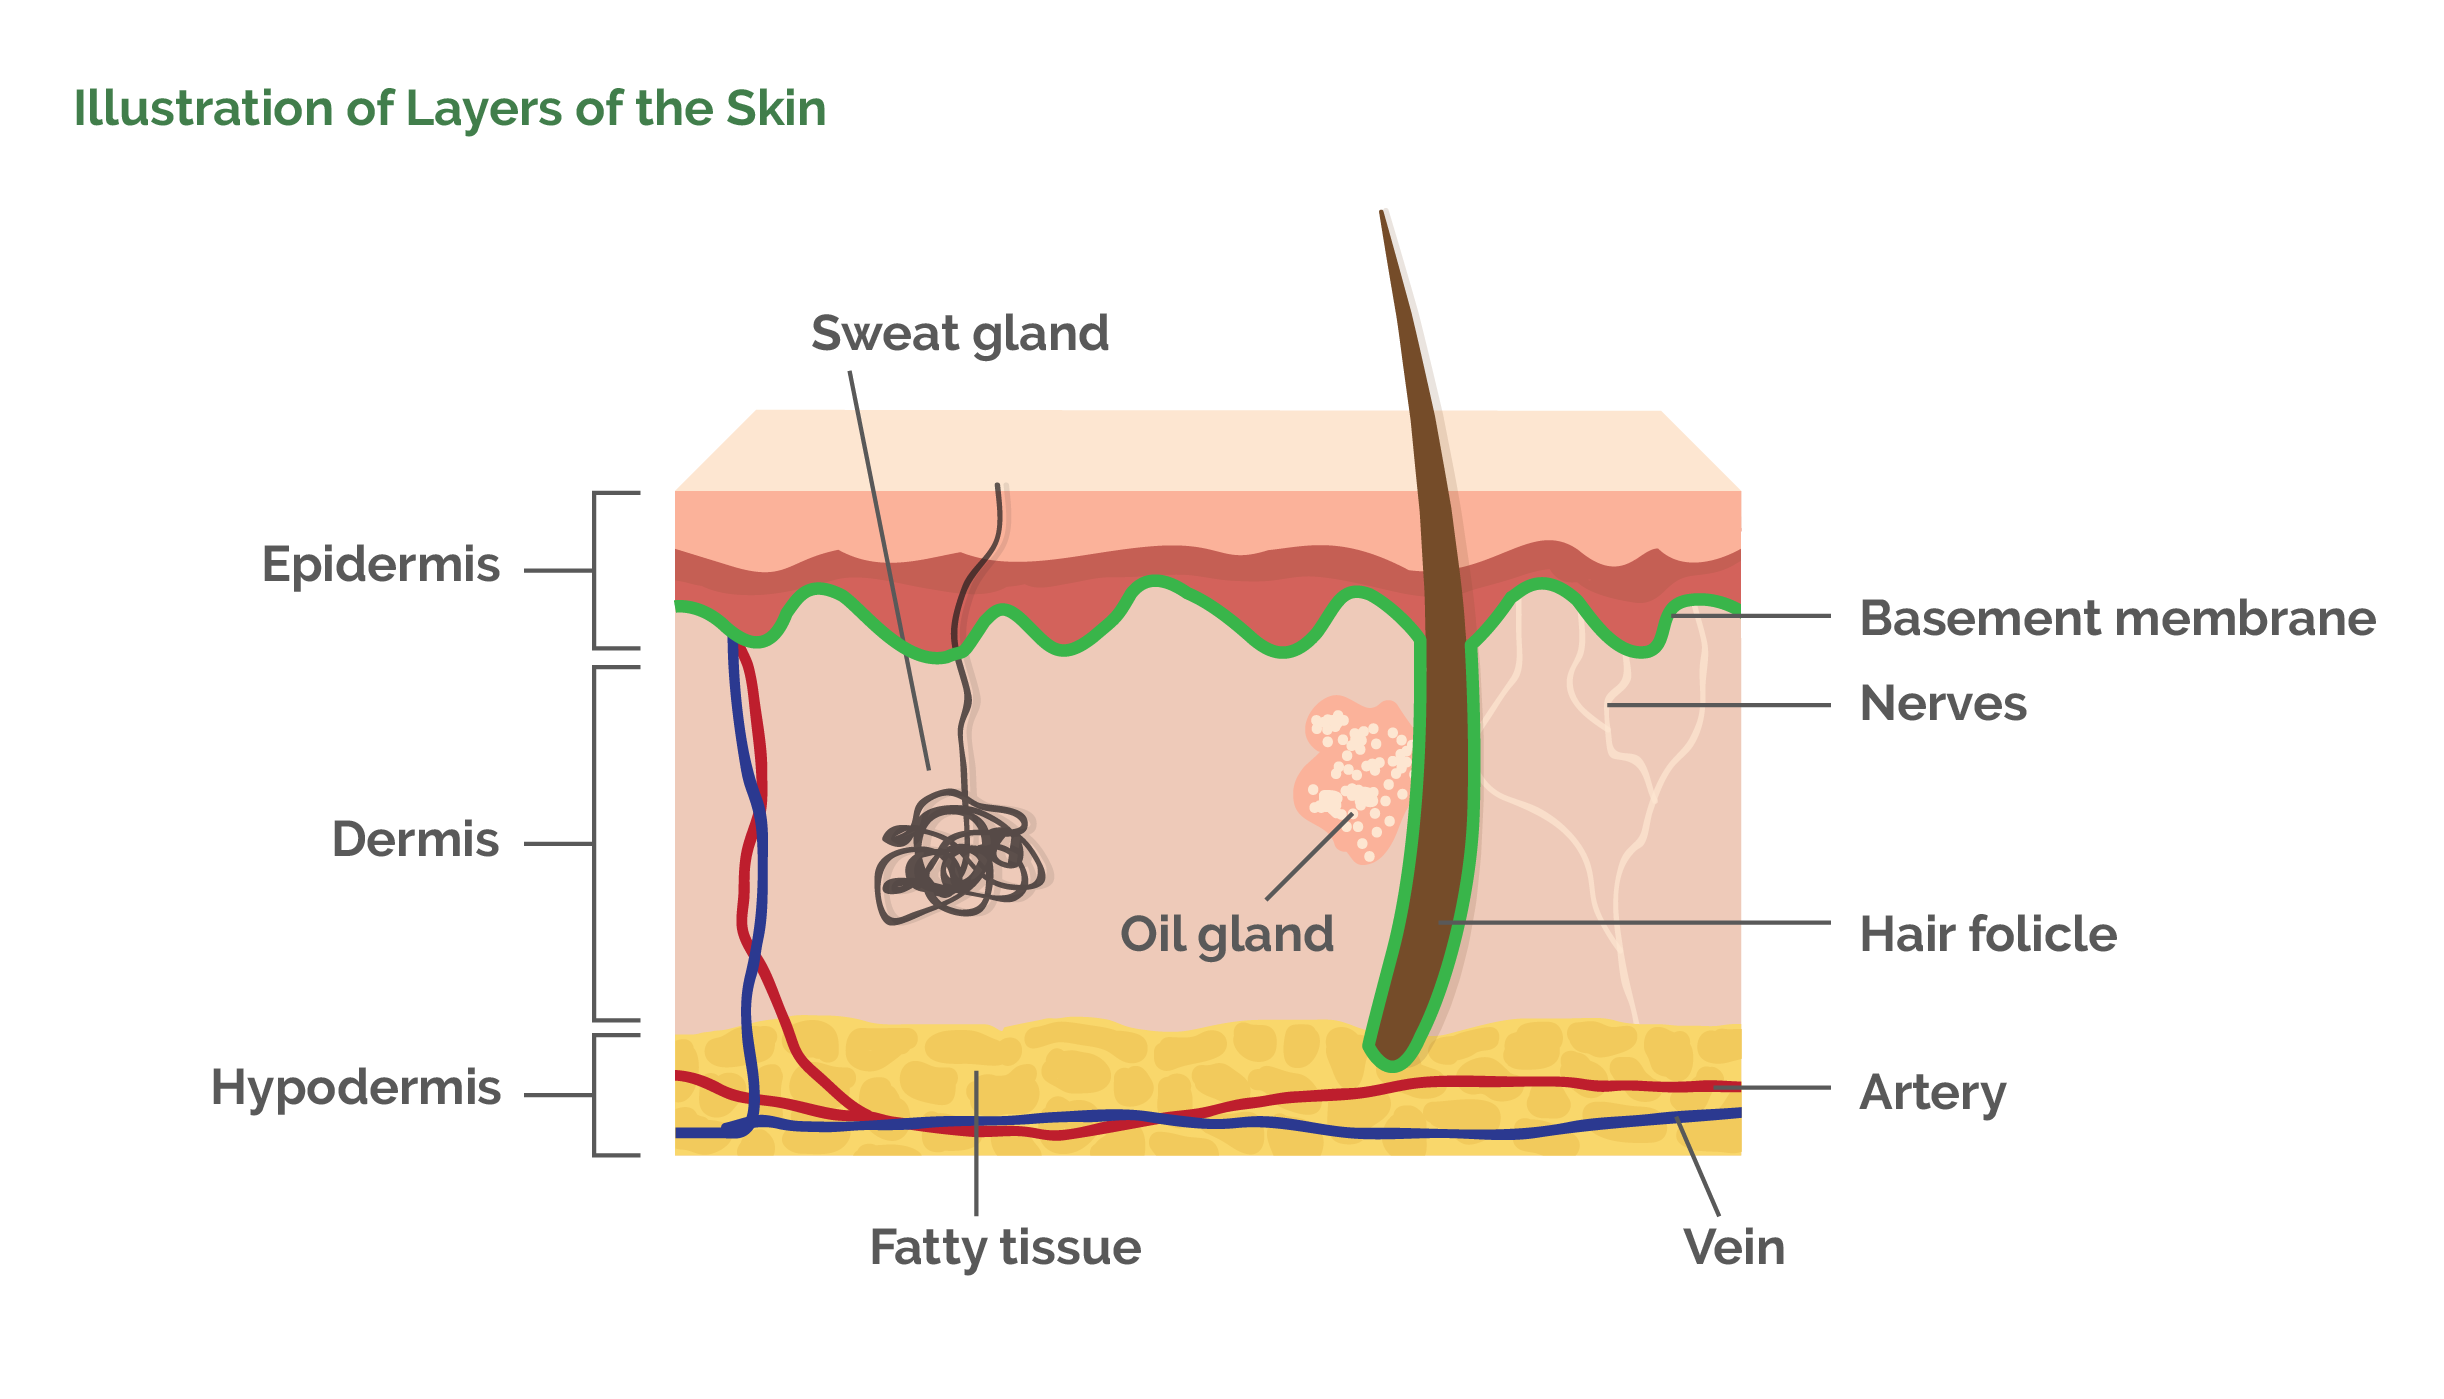 Illustration of Layers of the Skin